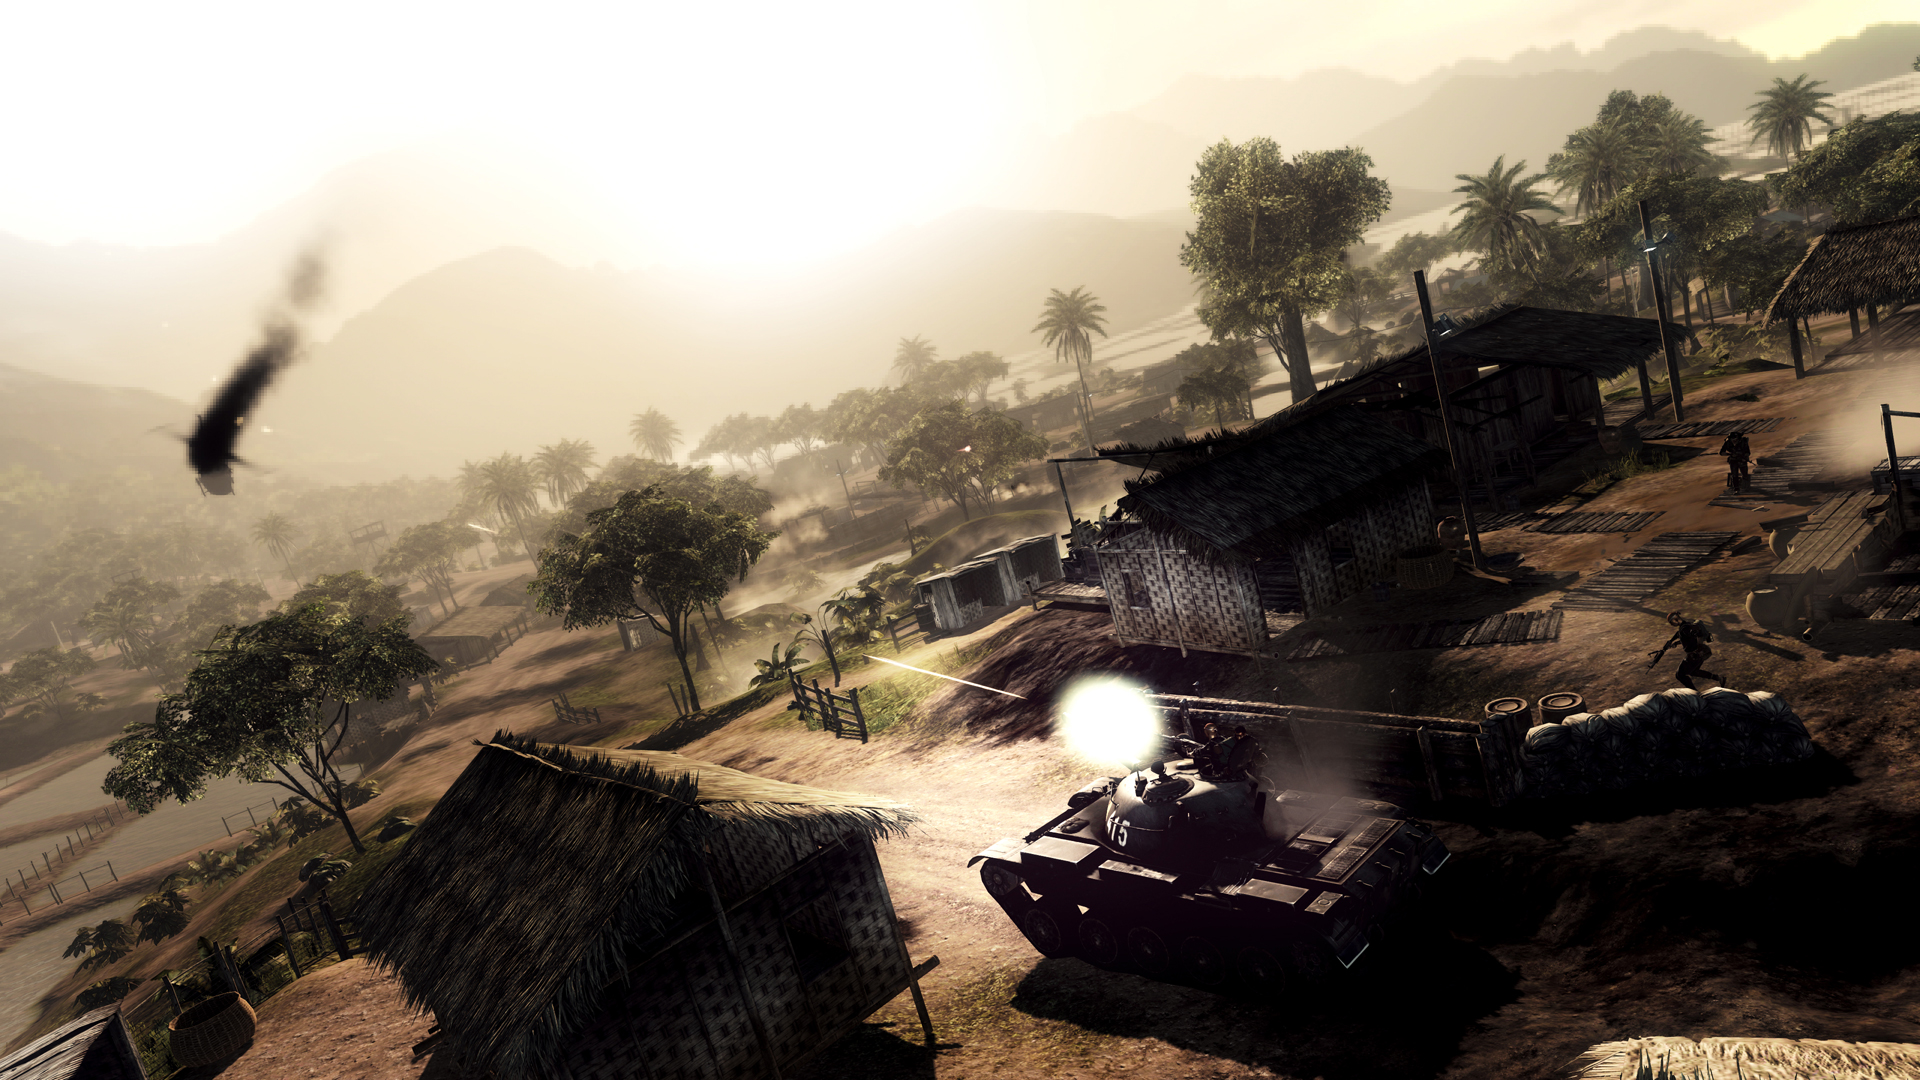 Media asset in full size related to 3dfxzone.it news item entitled as follows: Primi screenshots del game Battlefield: Bad Company 2 Vietnam | Image Name: news13846_2.jpg